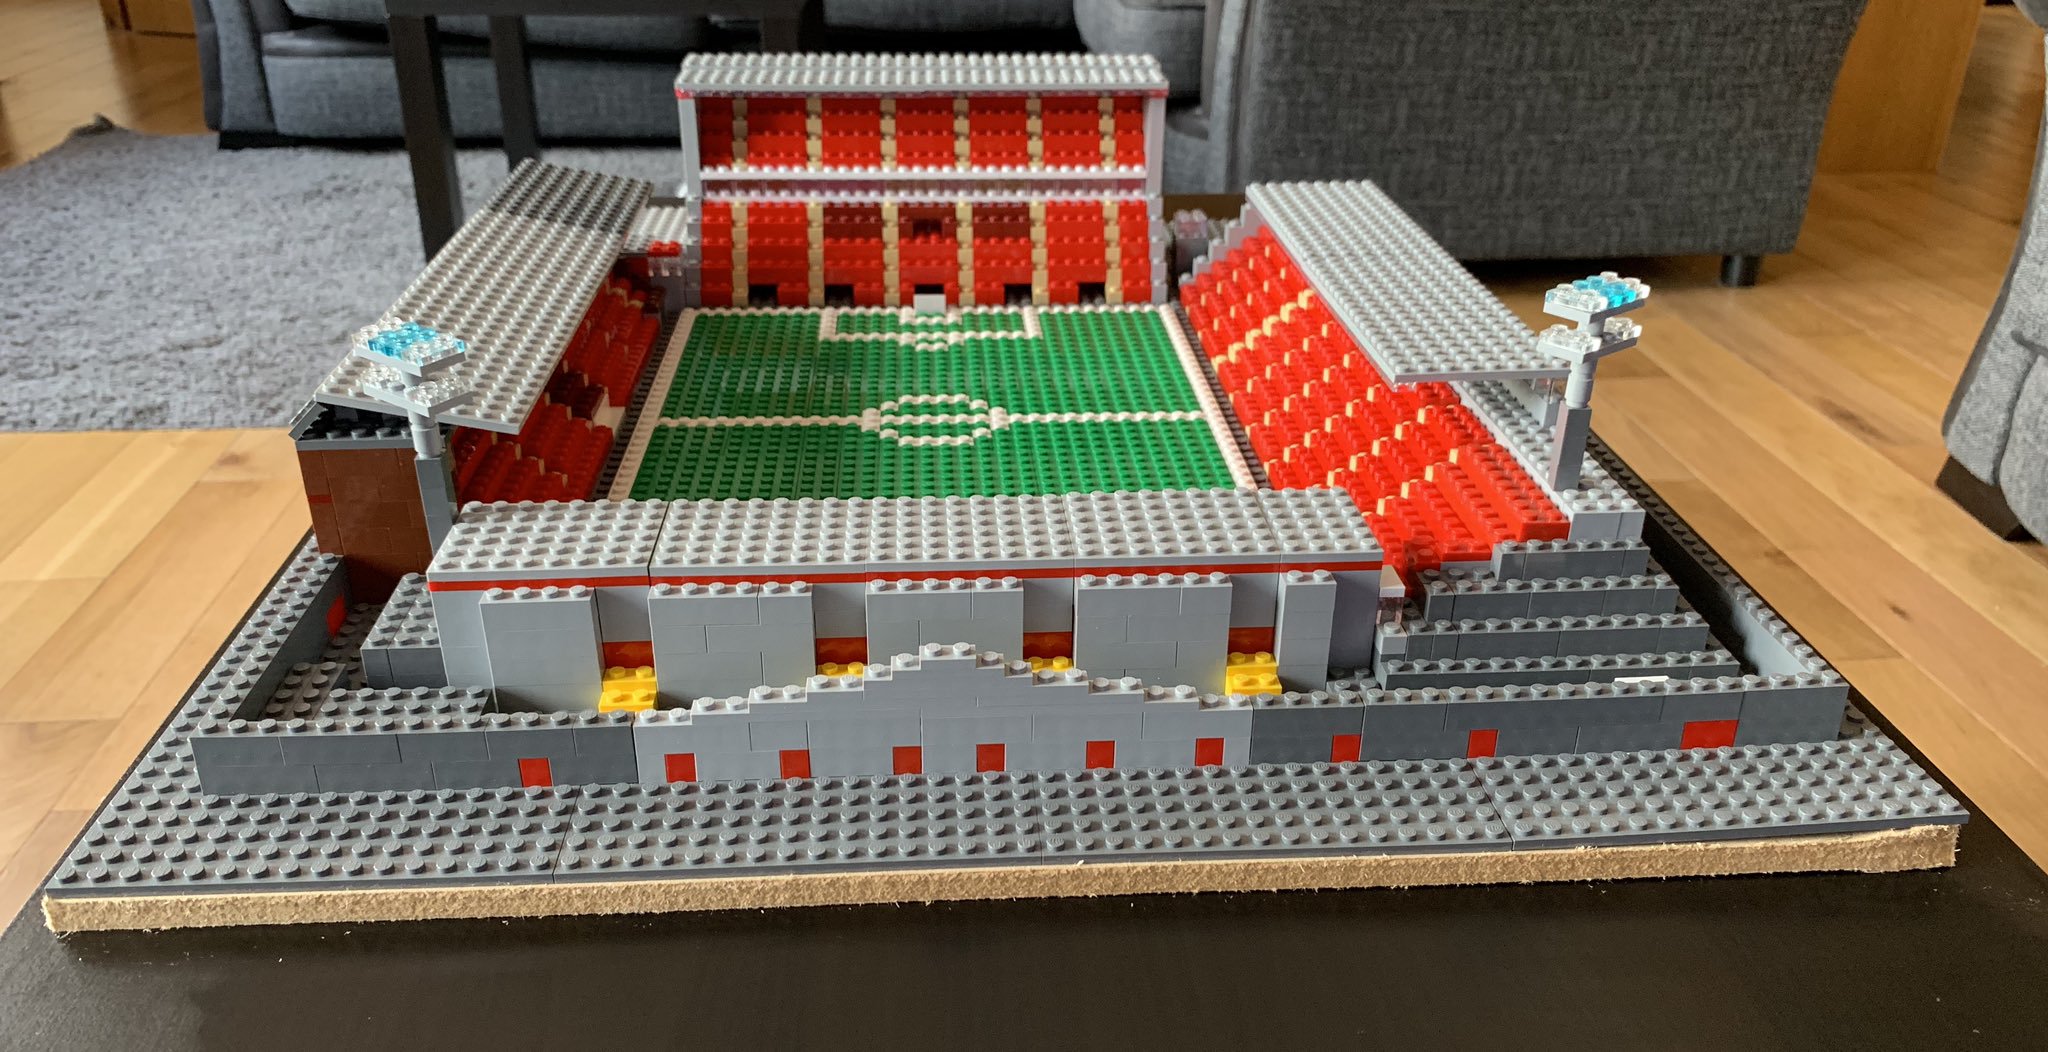 And finally... Dons fan completes LEGO stadium